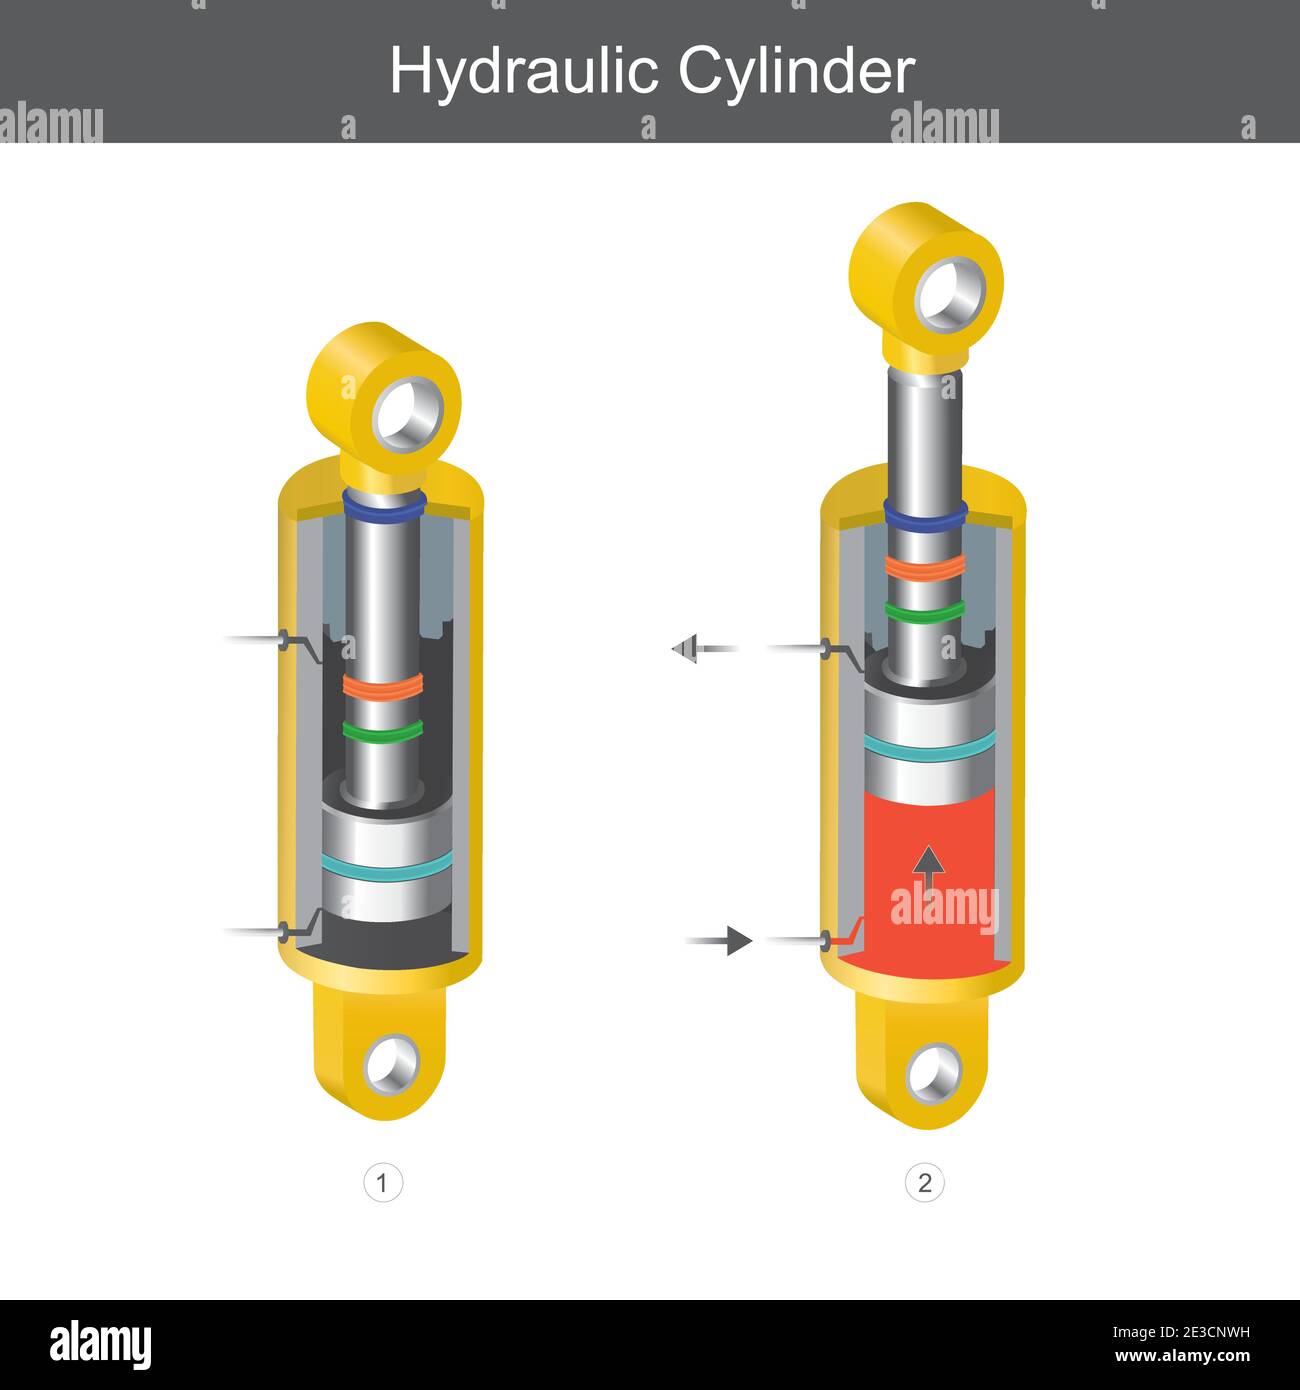 Hydraulic Cylinder. Illustration for the mechanical engineering use, it is explain a hydraulic cylinder parts or learning the benefit of oil pressure. Stock Vector